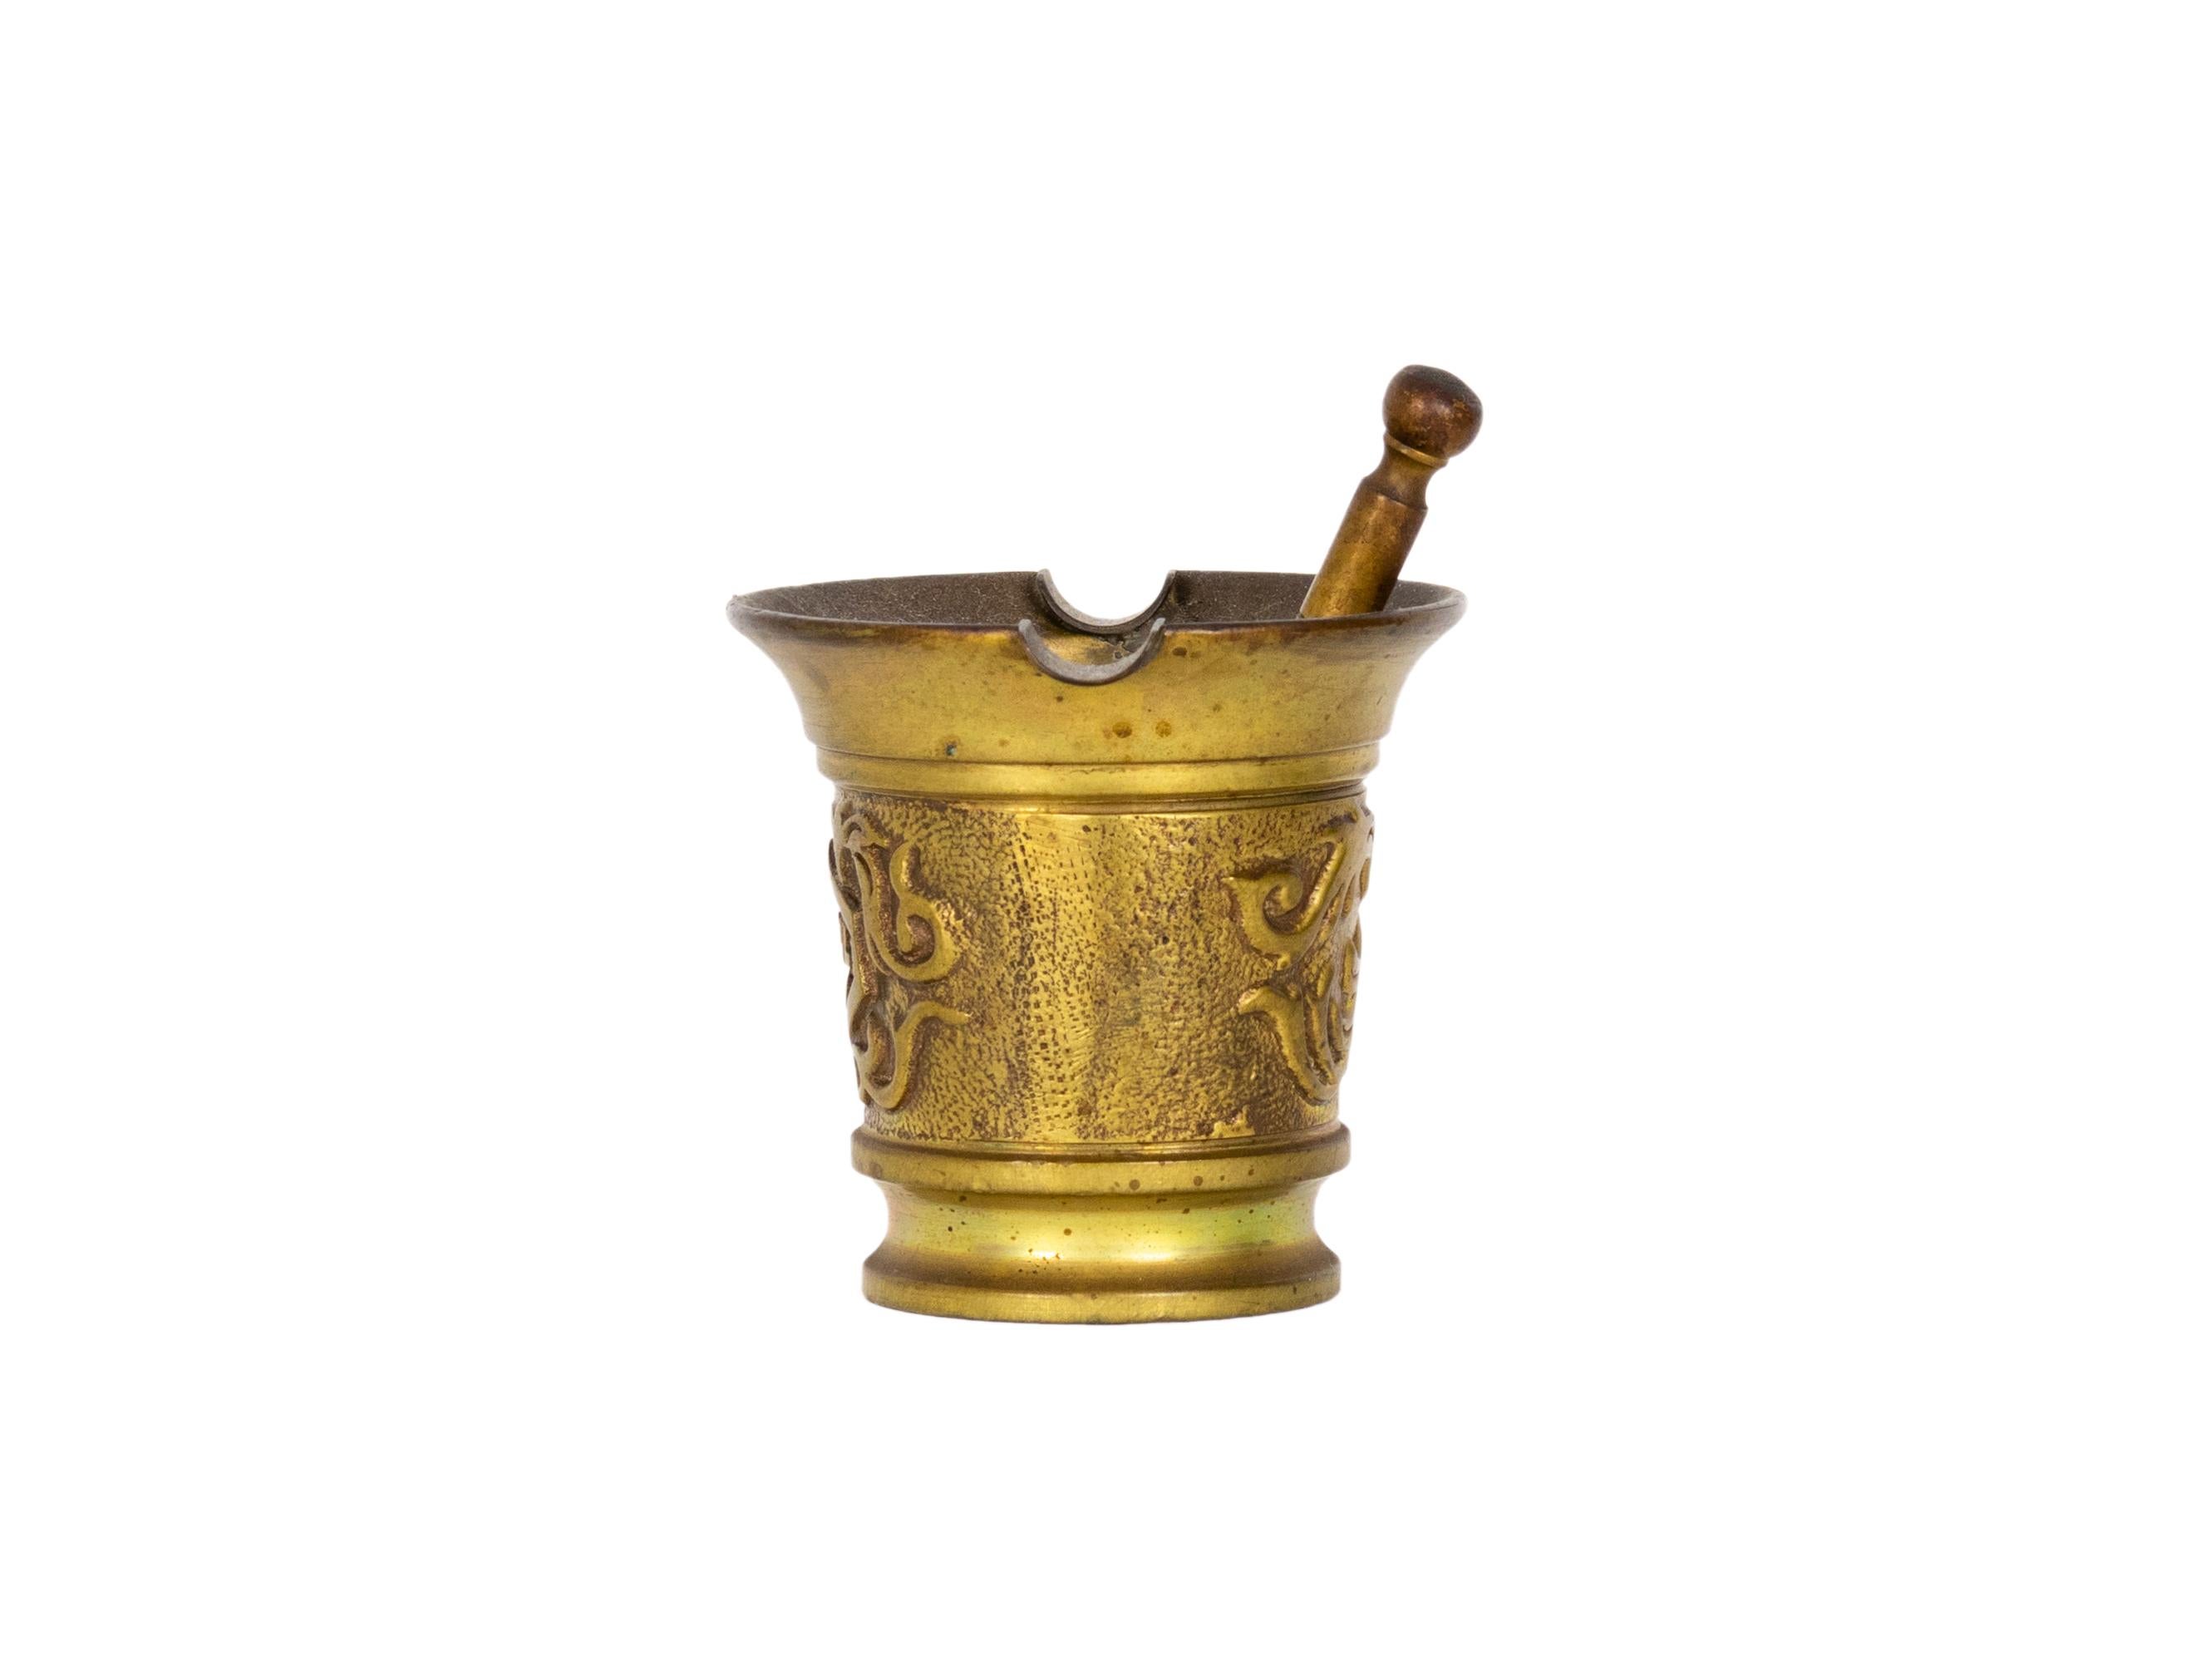 Open-ended cylindrical bronze mortar with two handles, a decoration in bands on the outside with inscription in capital letters “ATRAL”, a 1950s edition for a Portuguese  Pharmaceutical company, pioneering in the country in the sector.